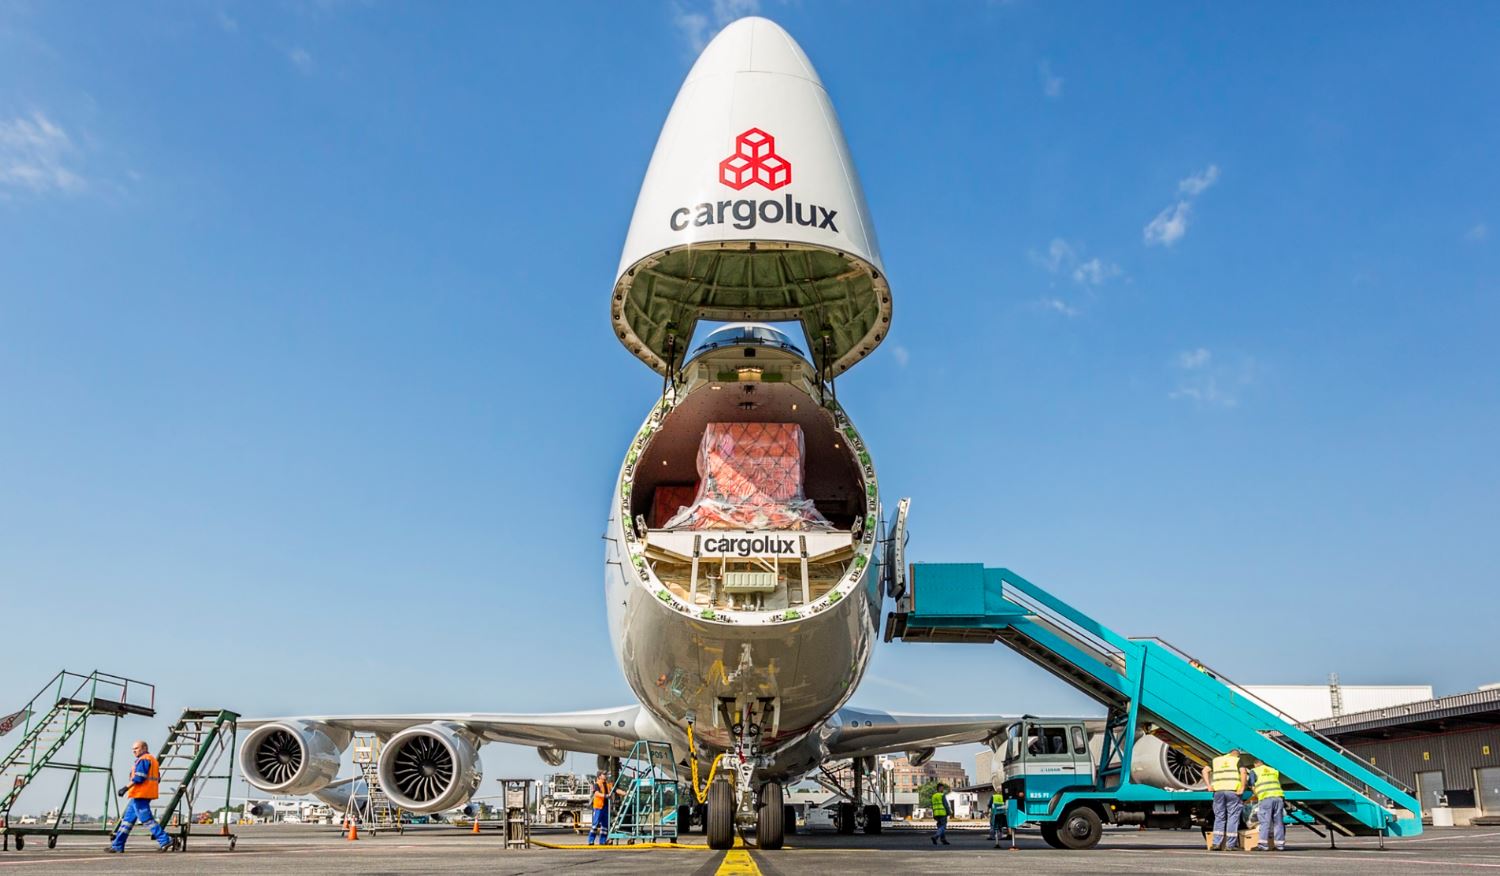 Cargolux China Becomes Henan Cargo Airlines - CargoForwarder Global